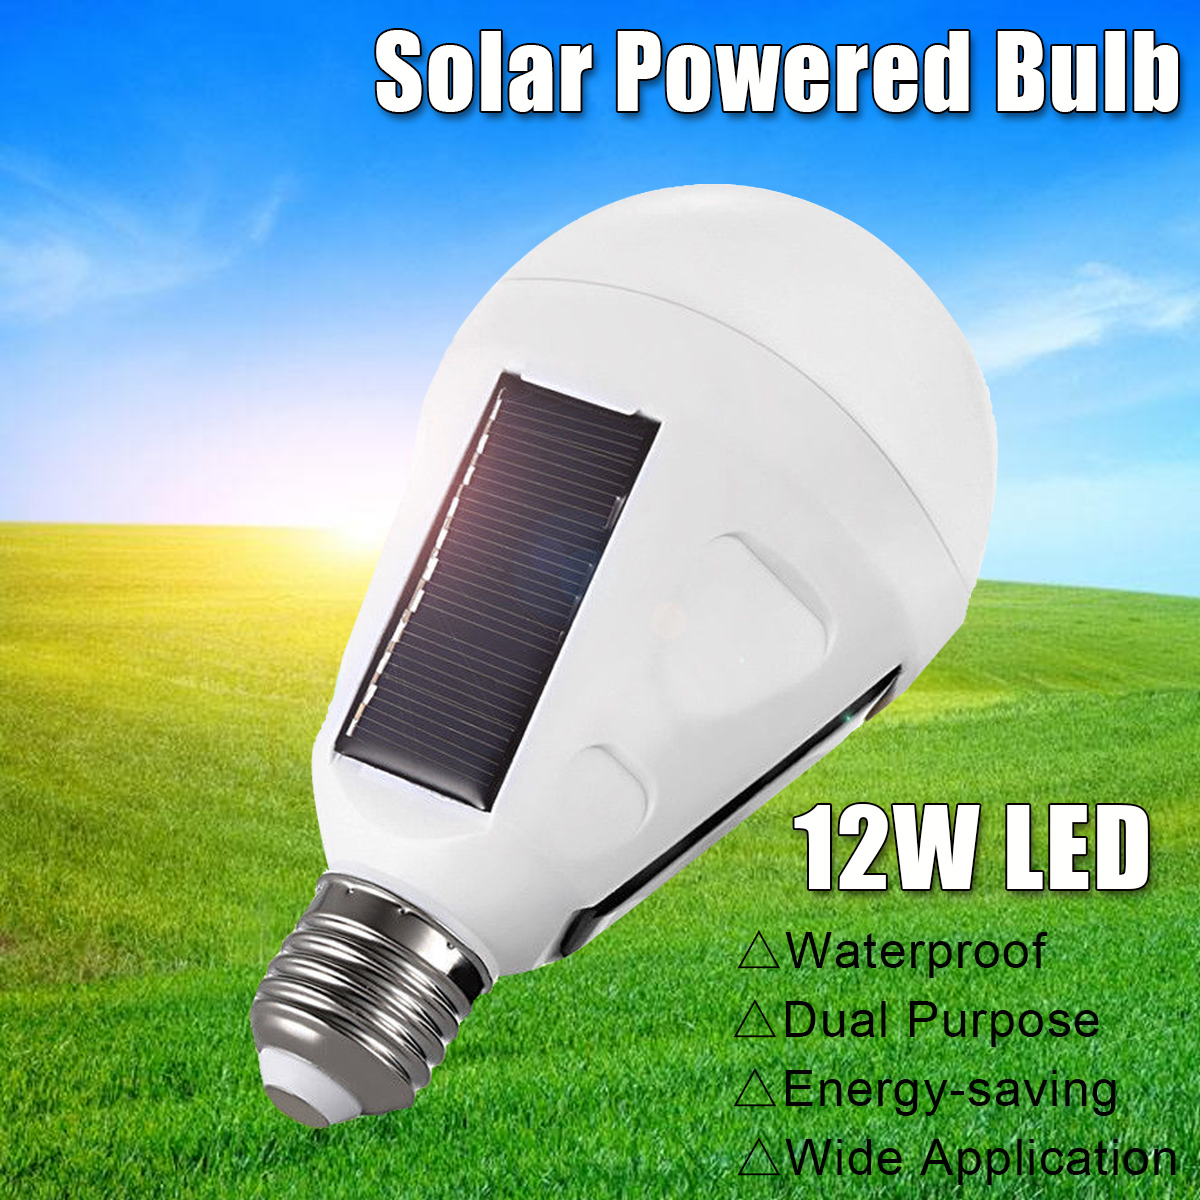 Outdoor-12W-Led-Solar-Powered-Tent-Lantern-Camping-Emergency-Lights-Portable-Fishing-Night-Bulb-1282161-1